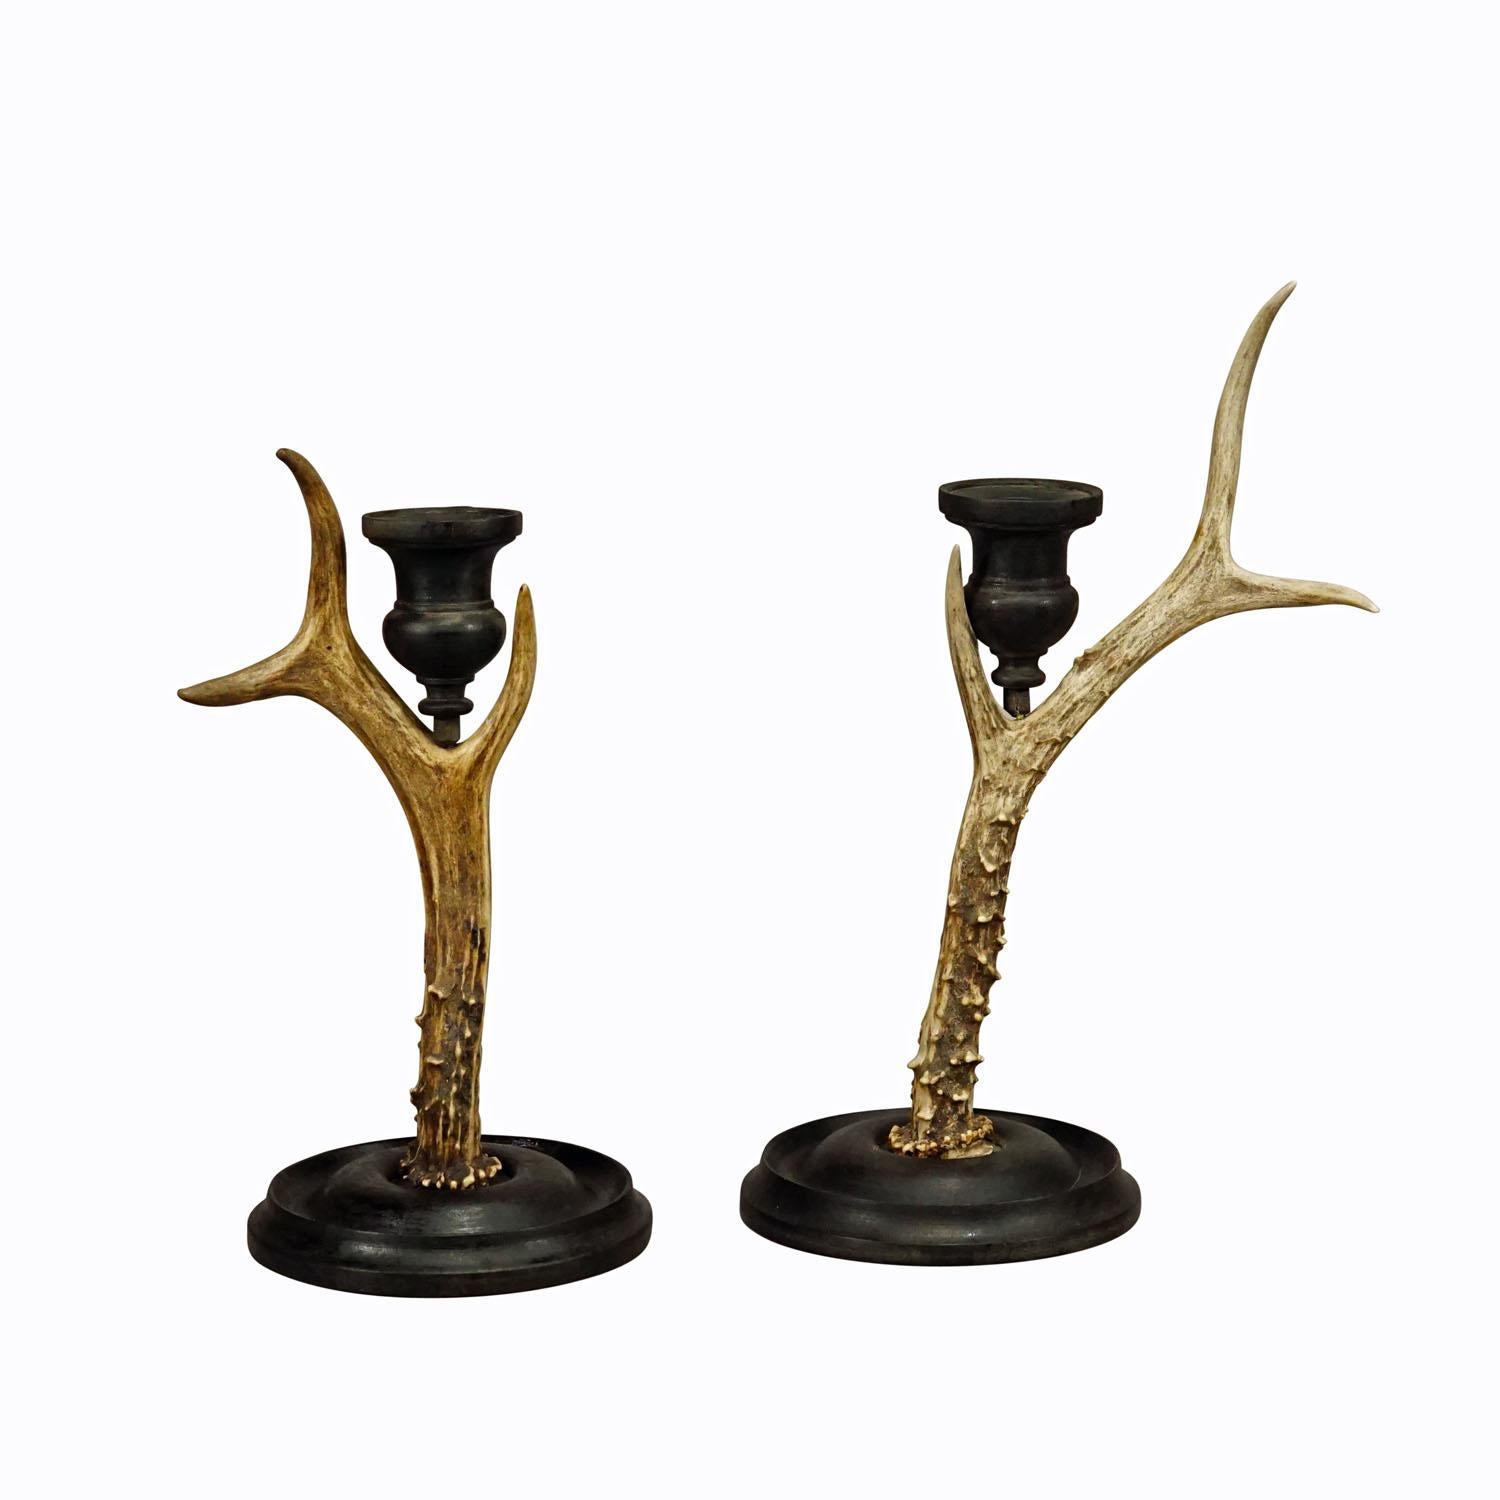 A Pair Vintage Black Forest Candle Holders with Wooden Base and Spout, Germany ca. 1930s

A pair of Black Forest candle holders with wooden turned base and spouts. Each made with an original deer antler. Manufactured in South Germany mid 20th